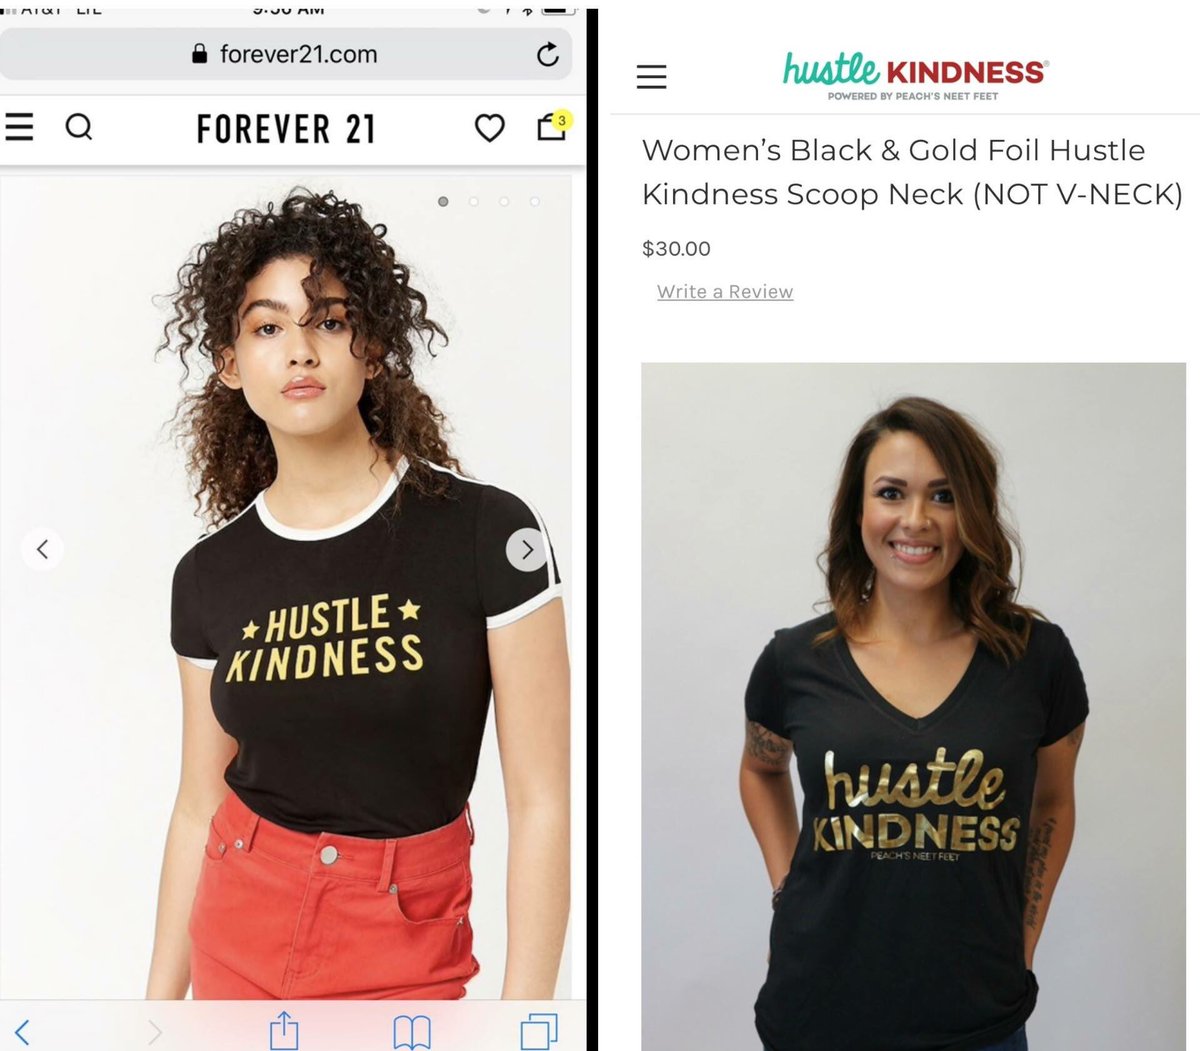 When @Forever21 rips off a small, non-profit company’s brand they are not hustling kindness one bit. @PeachsNeetFeet